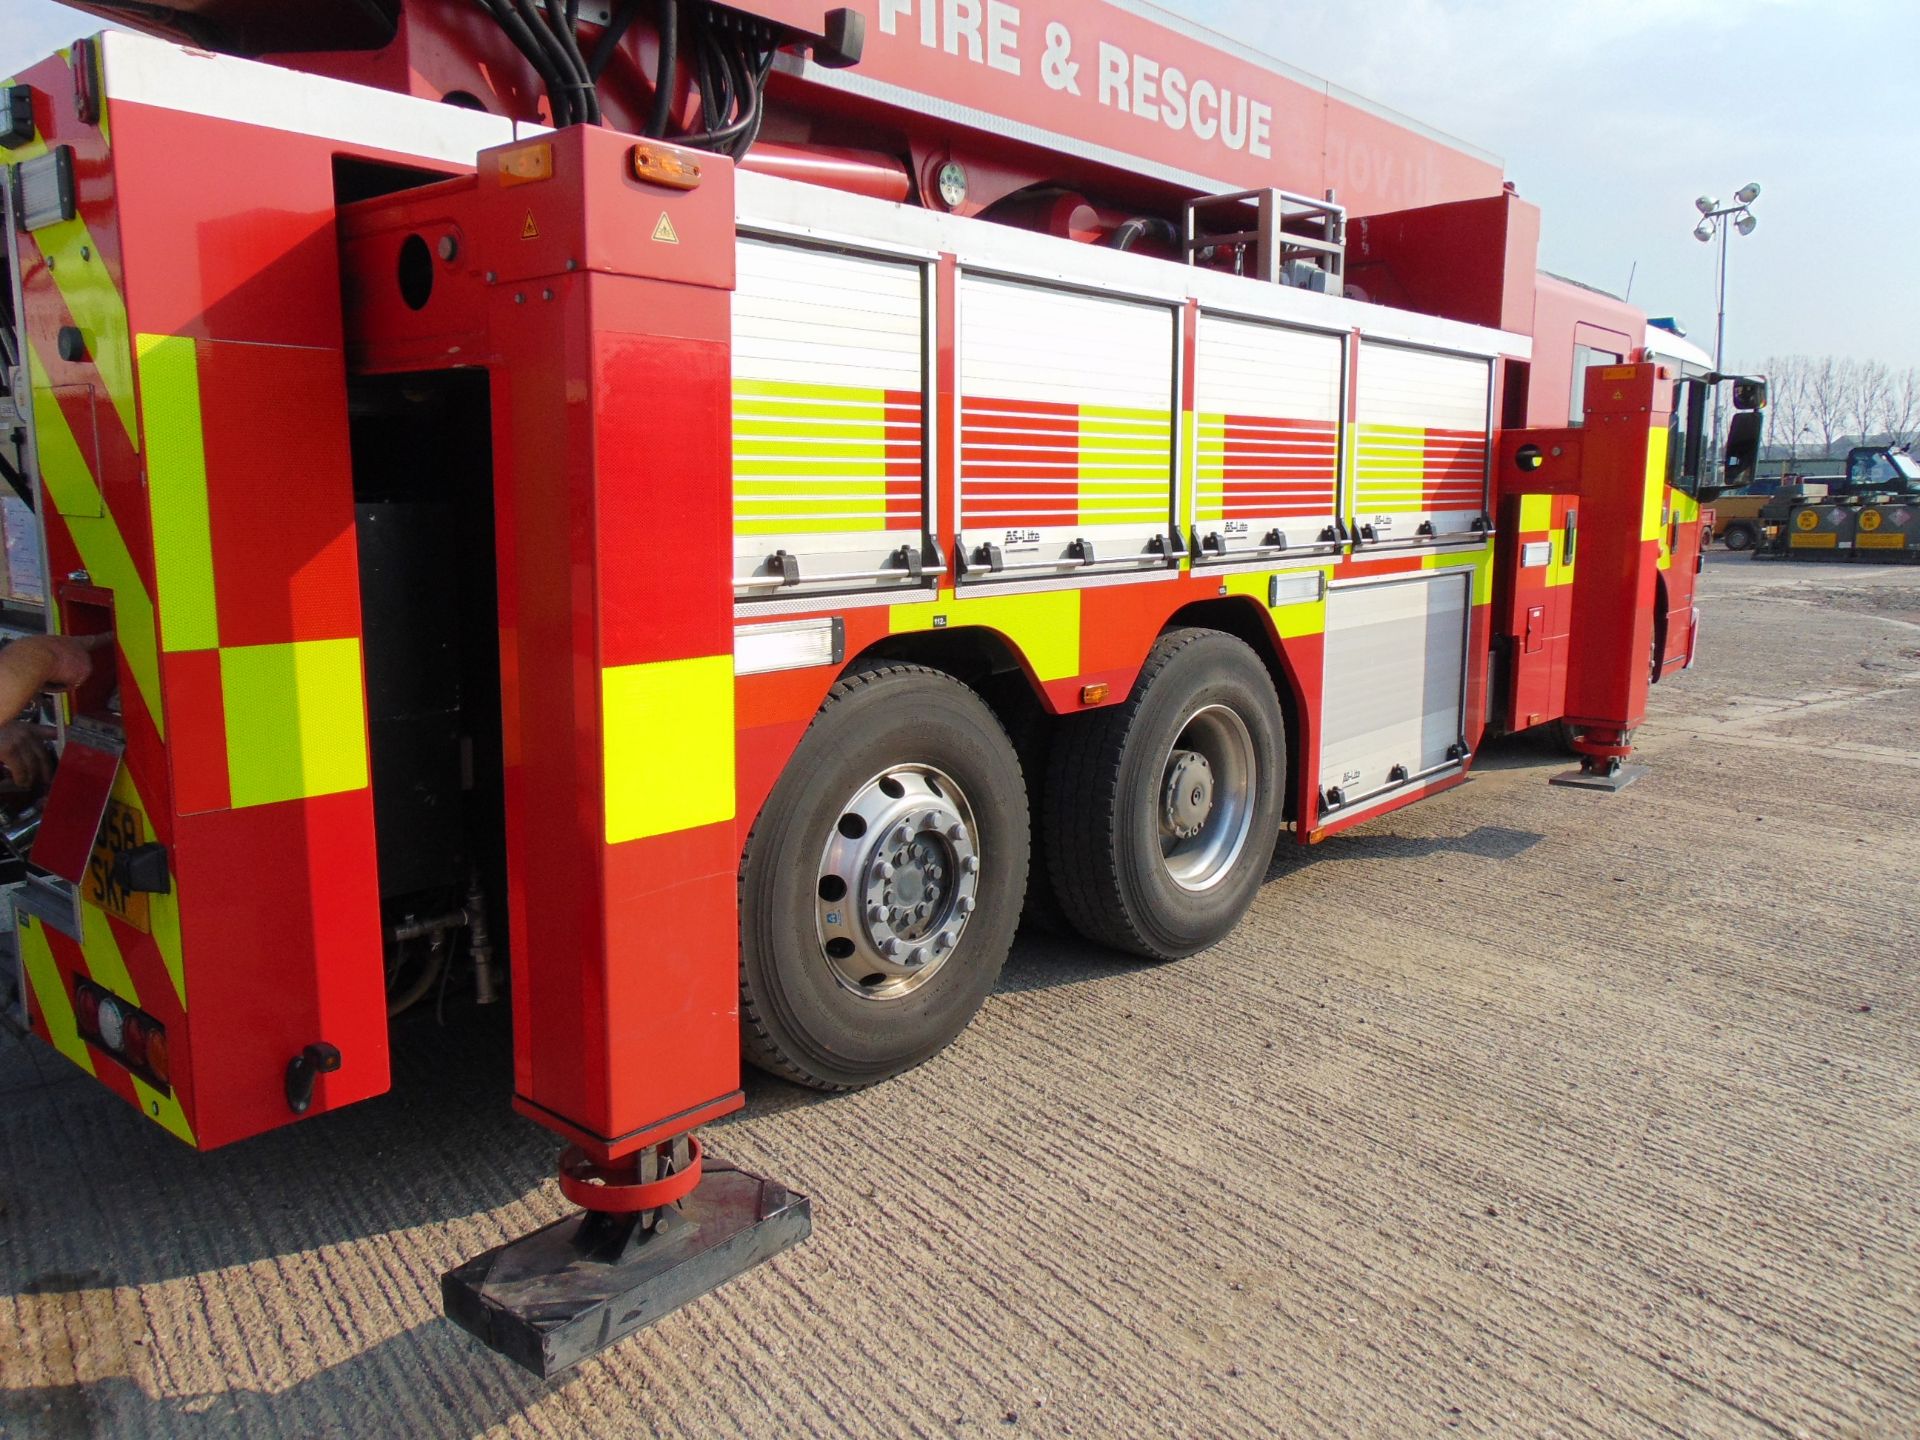 2008 Mercedes Econic CARP (Combined Aerial Rescue Pump) 6x2 Aerial Work Platform / Fire Appliance - Image 19 of 49